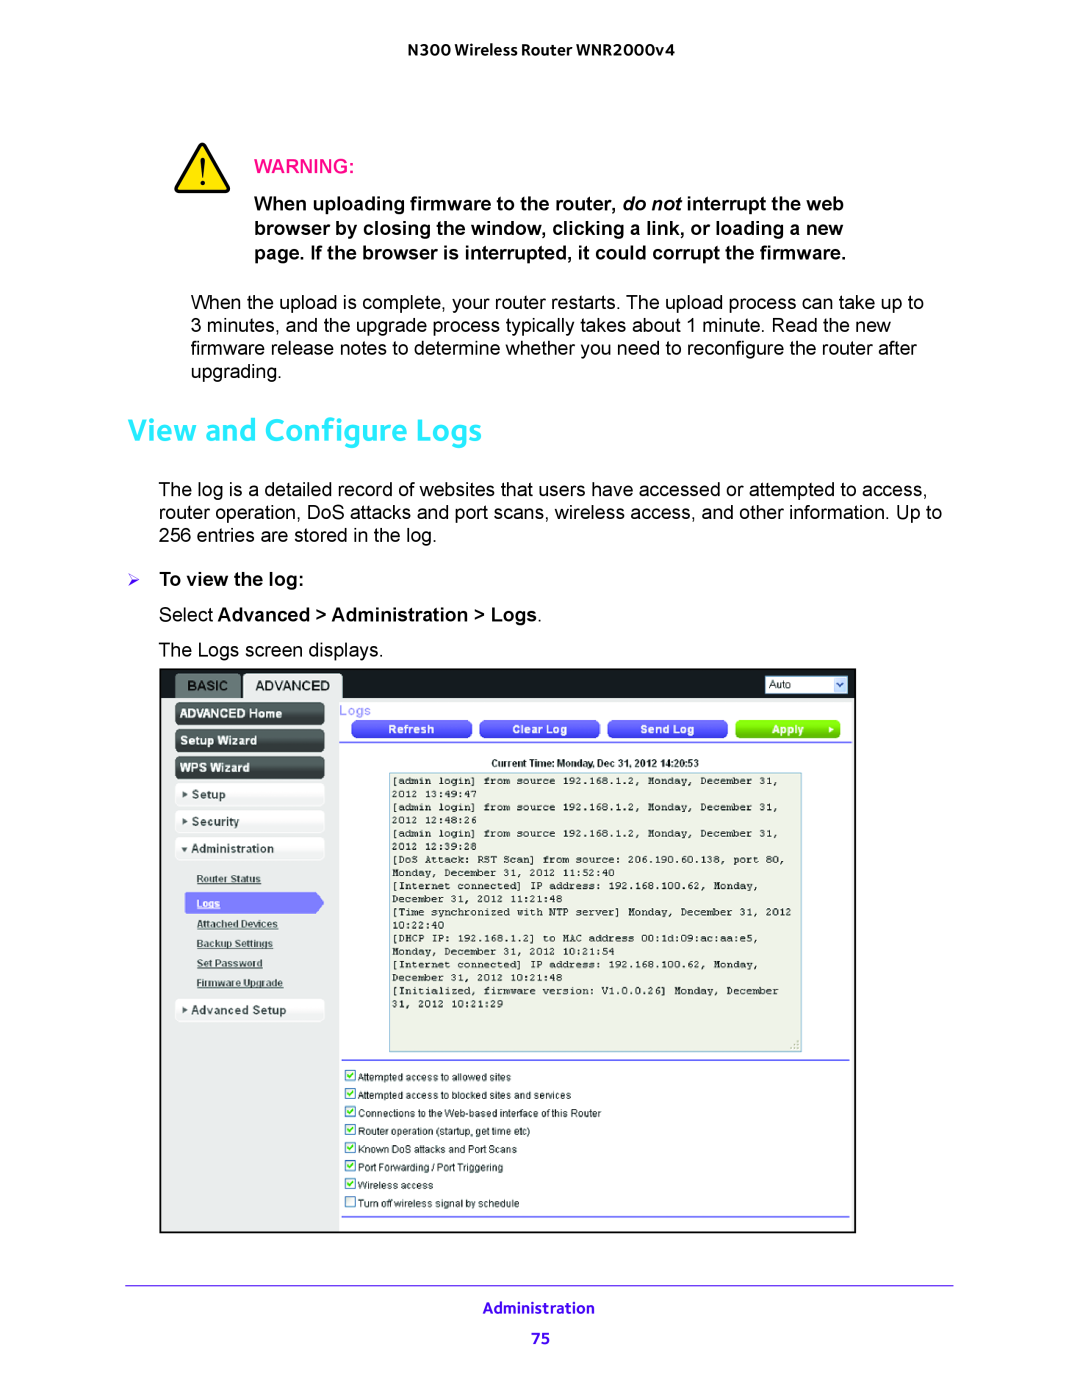 NETGEAR WNR200v4 user manual View and Configure Logs,  To view the log 